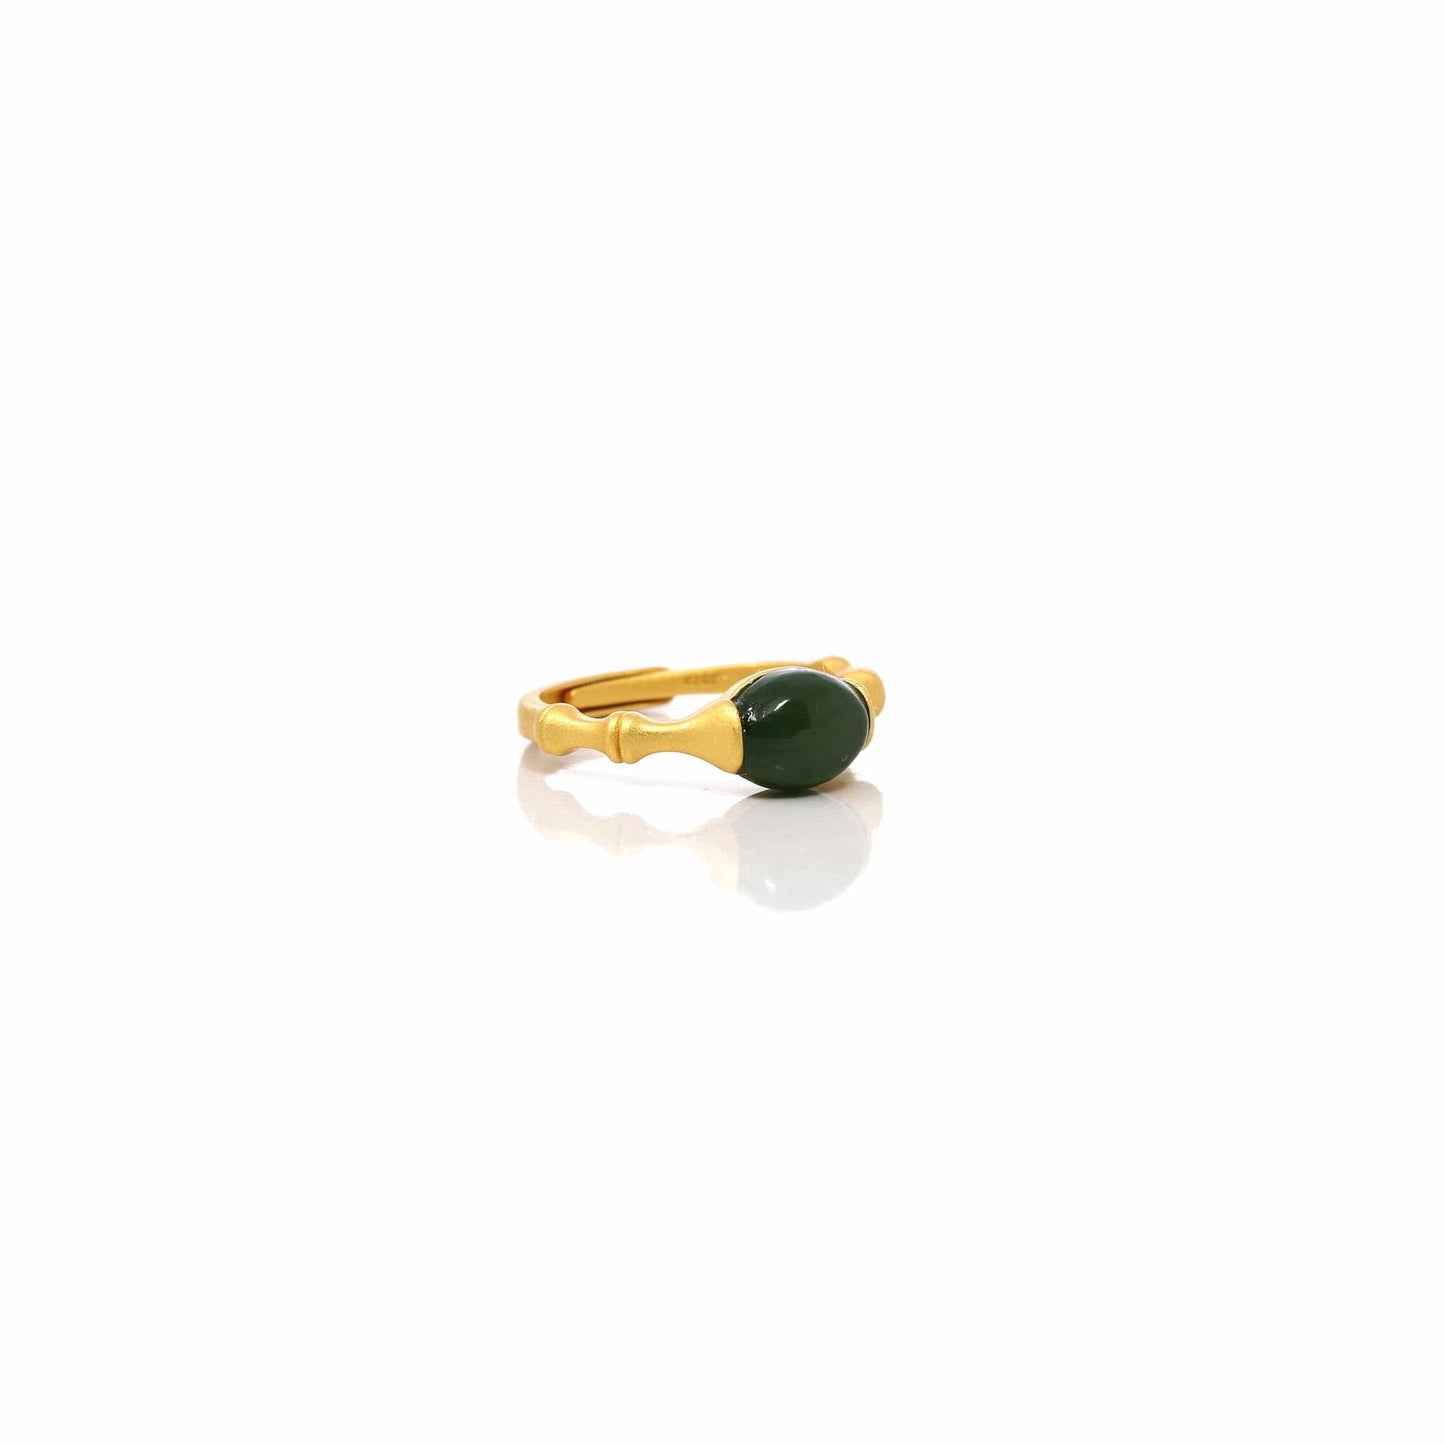 RealJade® Co. Jade Ring  RealJade® Co. "Classic Oval" Sterling Silver Real Green Nephrite Jade Bamboo Ring For Her